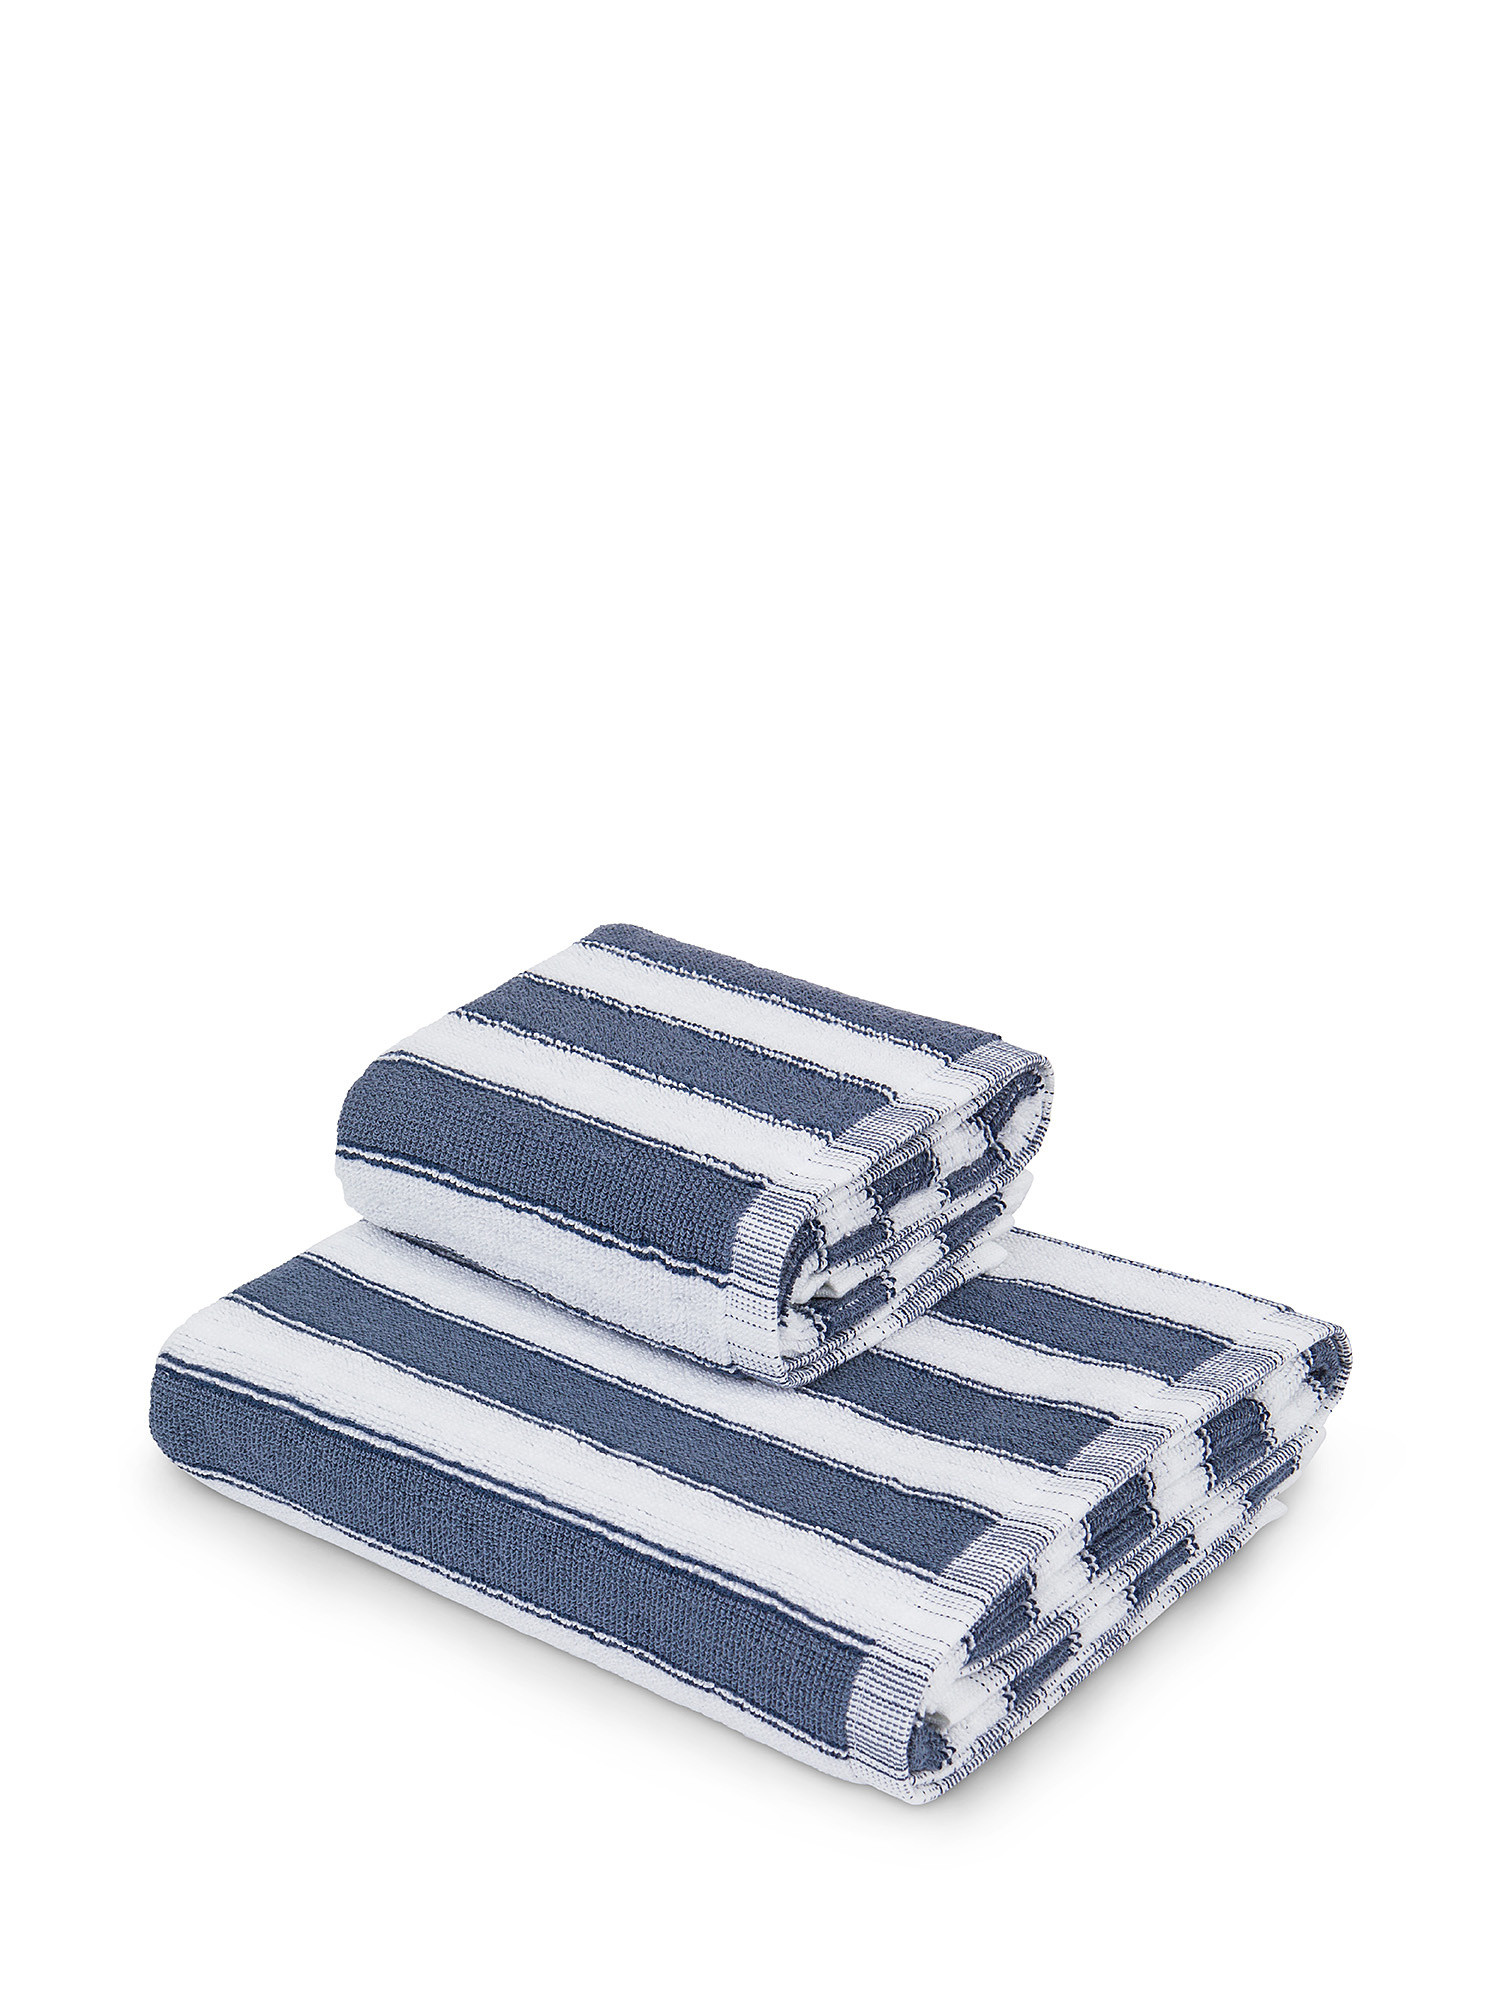 Pure cotton terry towel., Blue, large image number 0